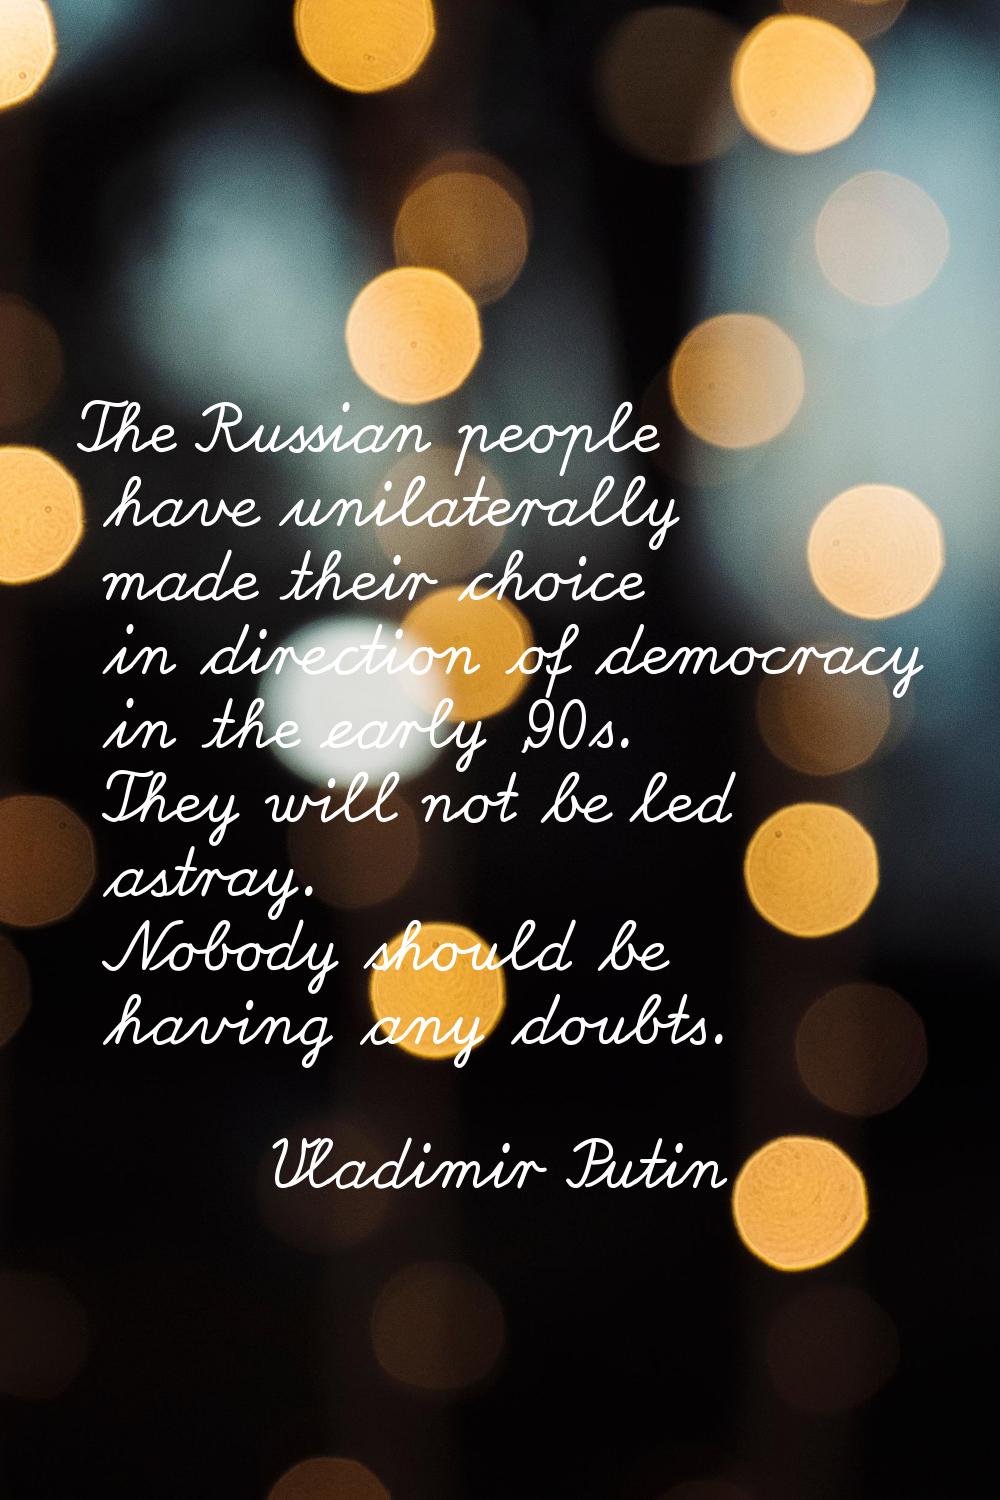 The Russian people have unilaterally made their choice in direction of democracy in the early '90s.